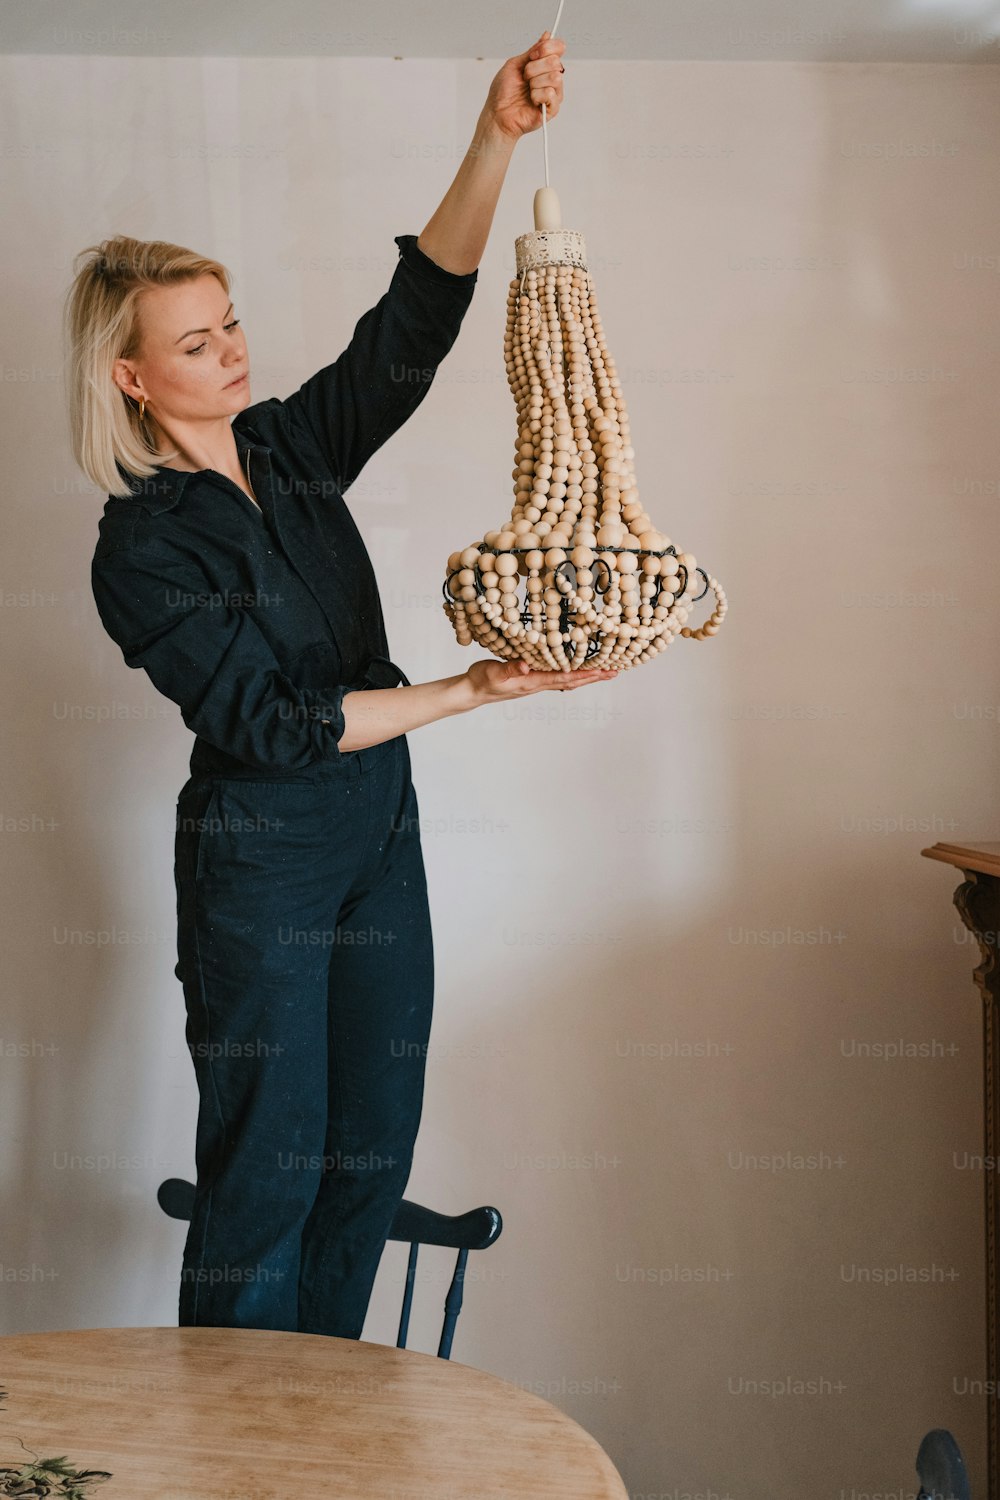 a woman holding a chandelier made of wooden beads